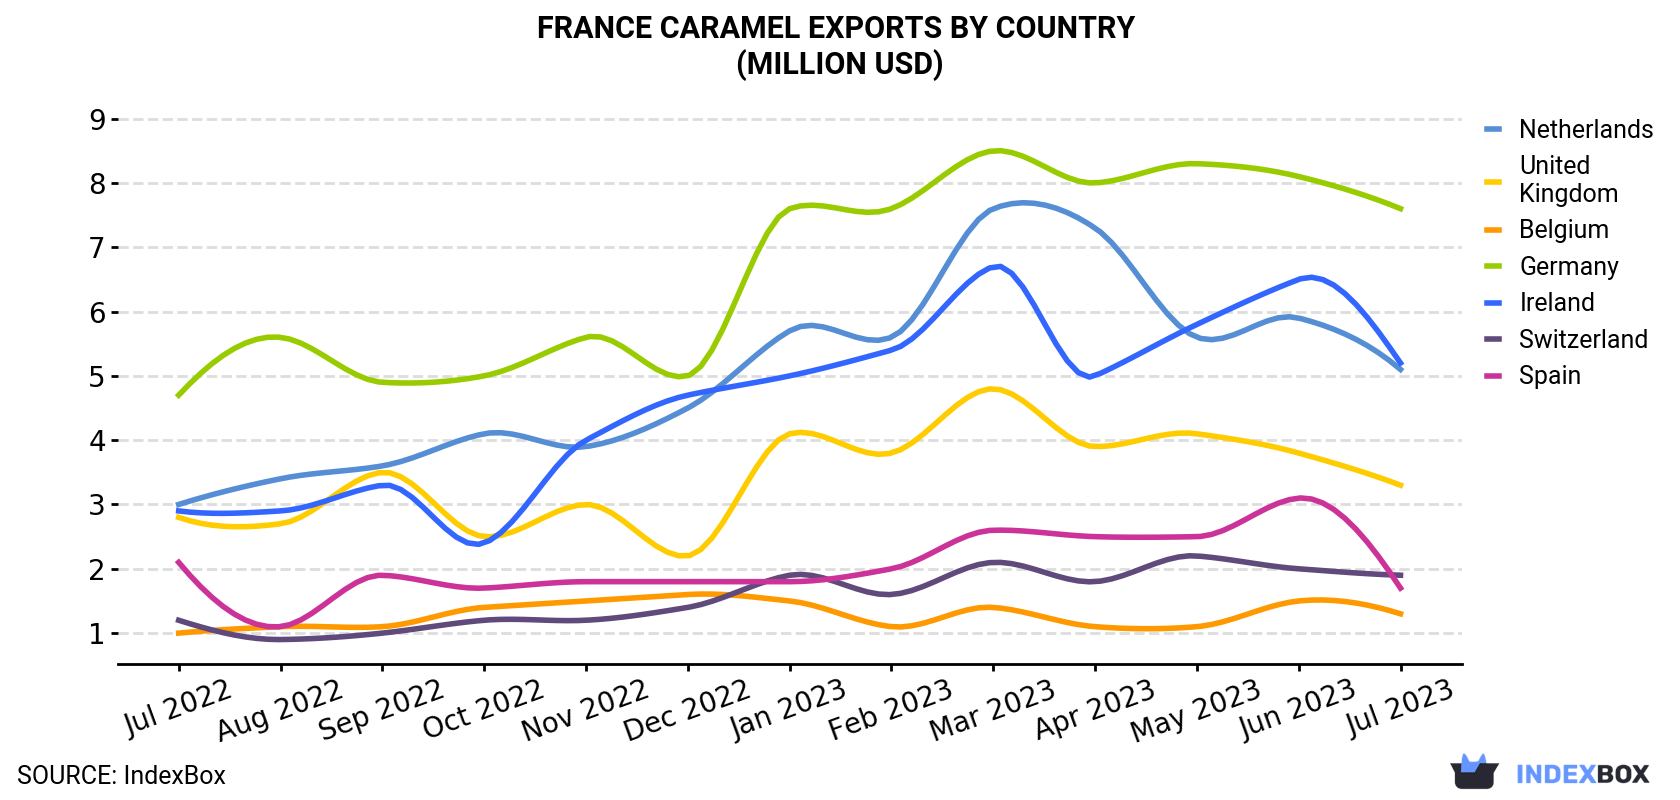 France Caramel Exports By Country (Million USD)